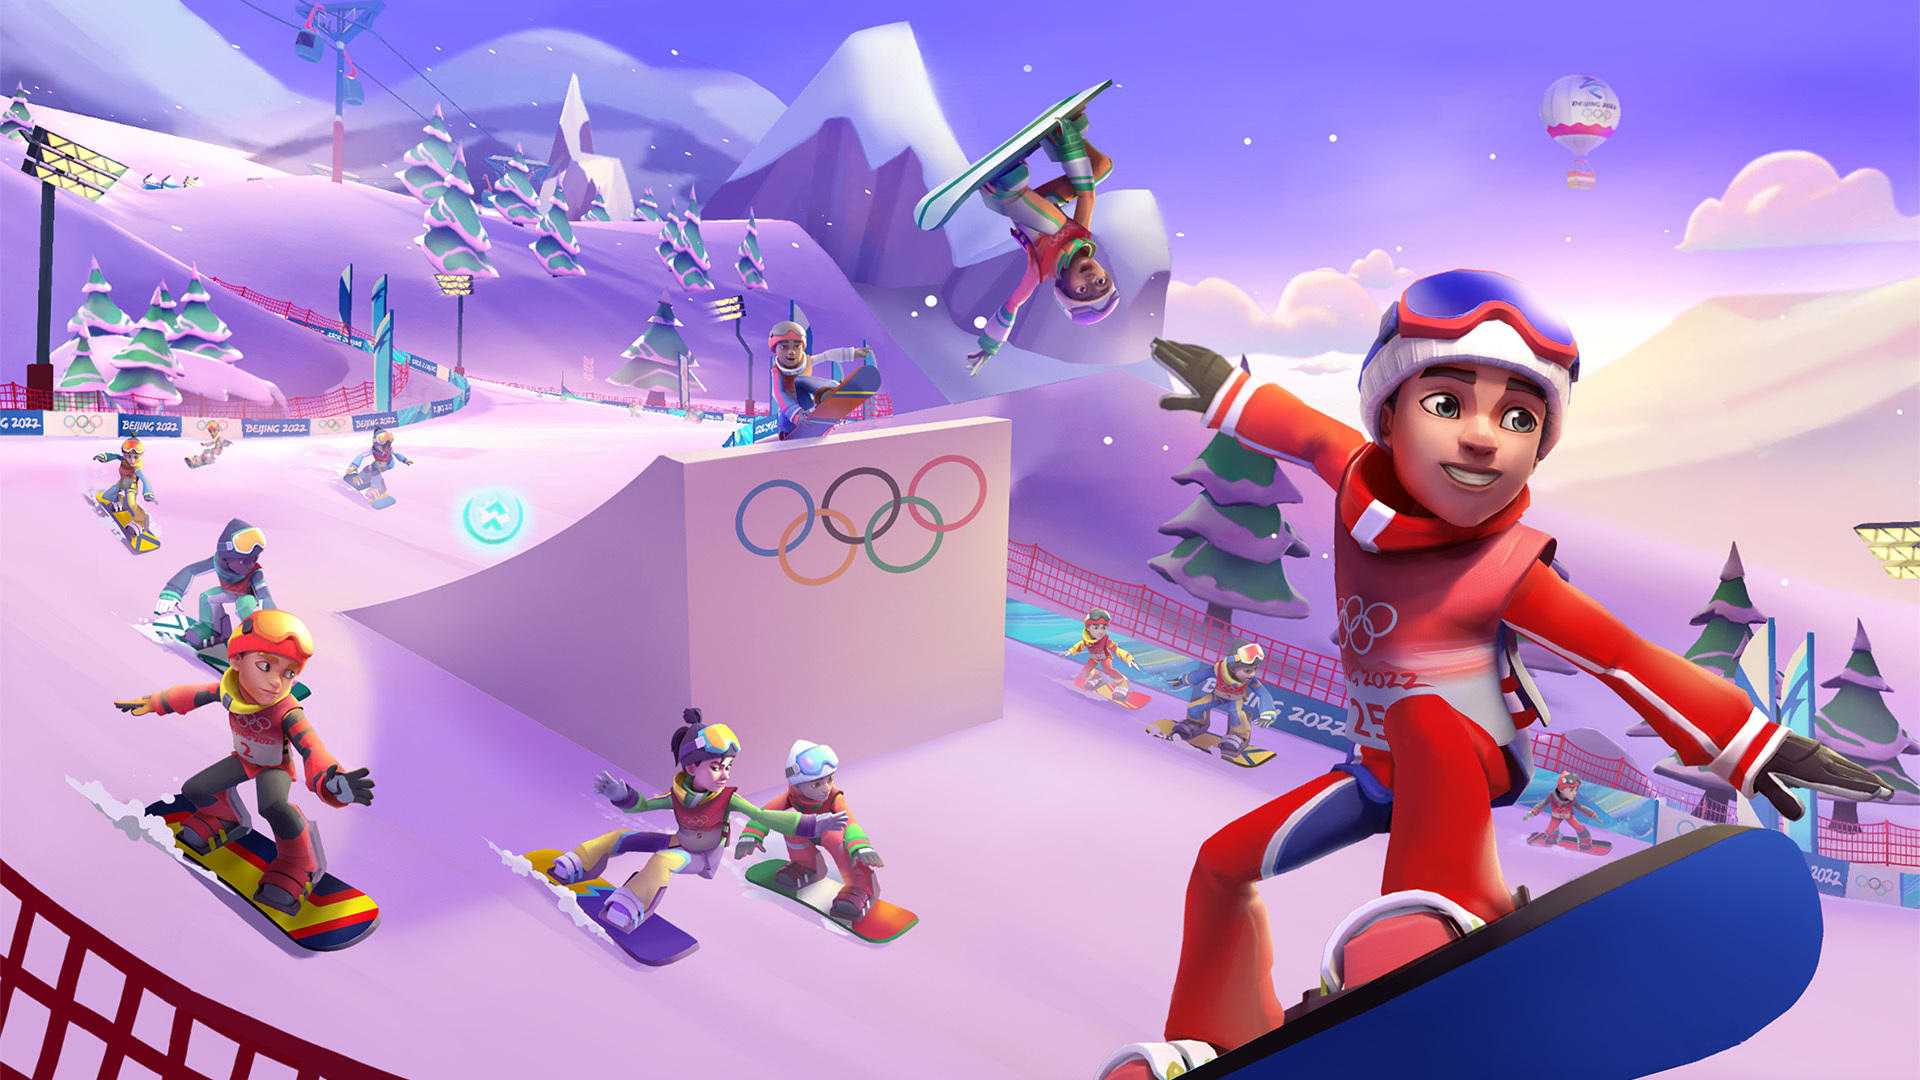 Olympic Games Jam: Beijing 2022 Gives Fans A Taste Of The Action